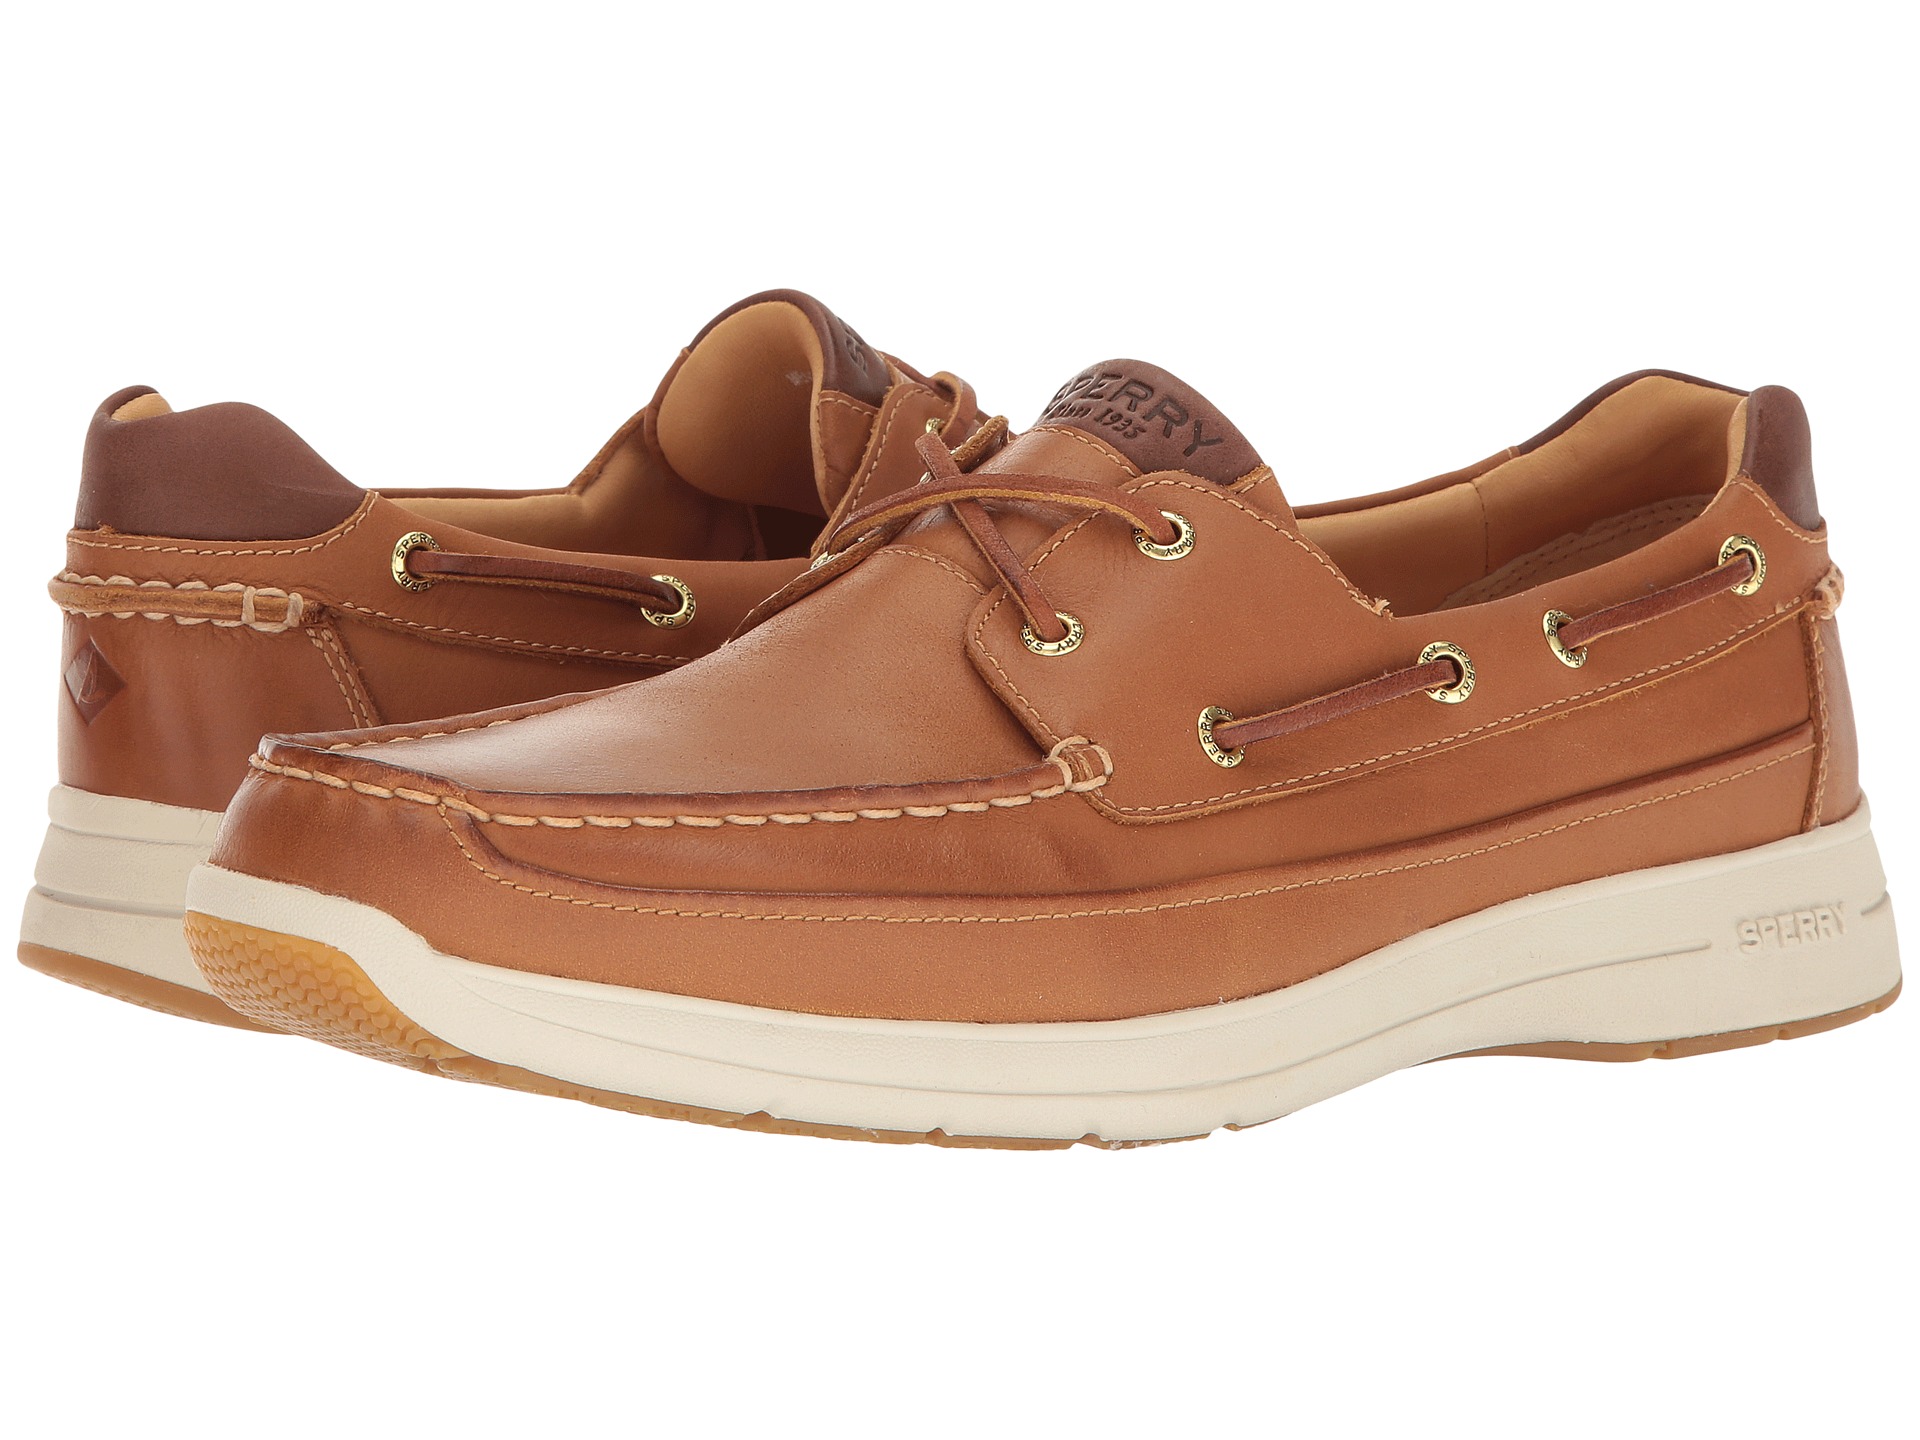 Sperry Gold Cup Ultra 2-Eye w/ ASV at Zappos.com